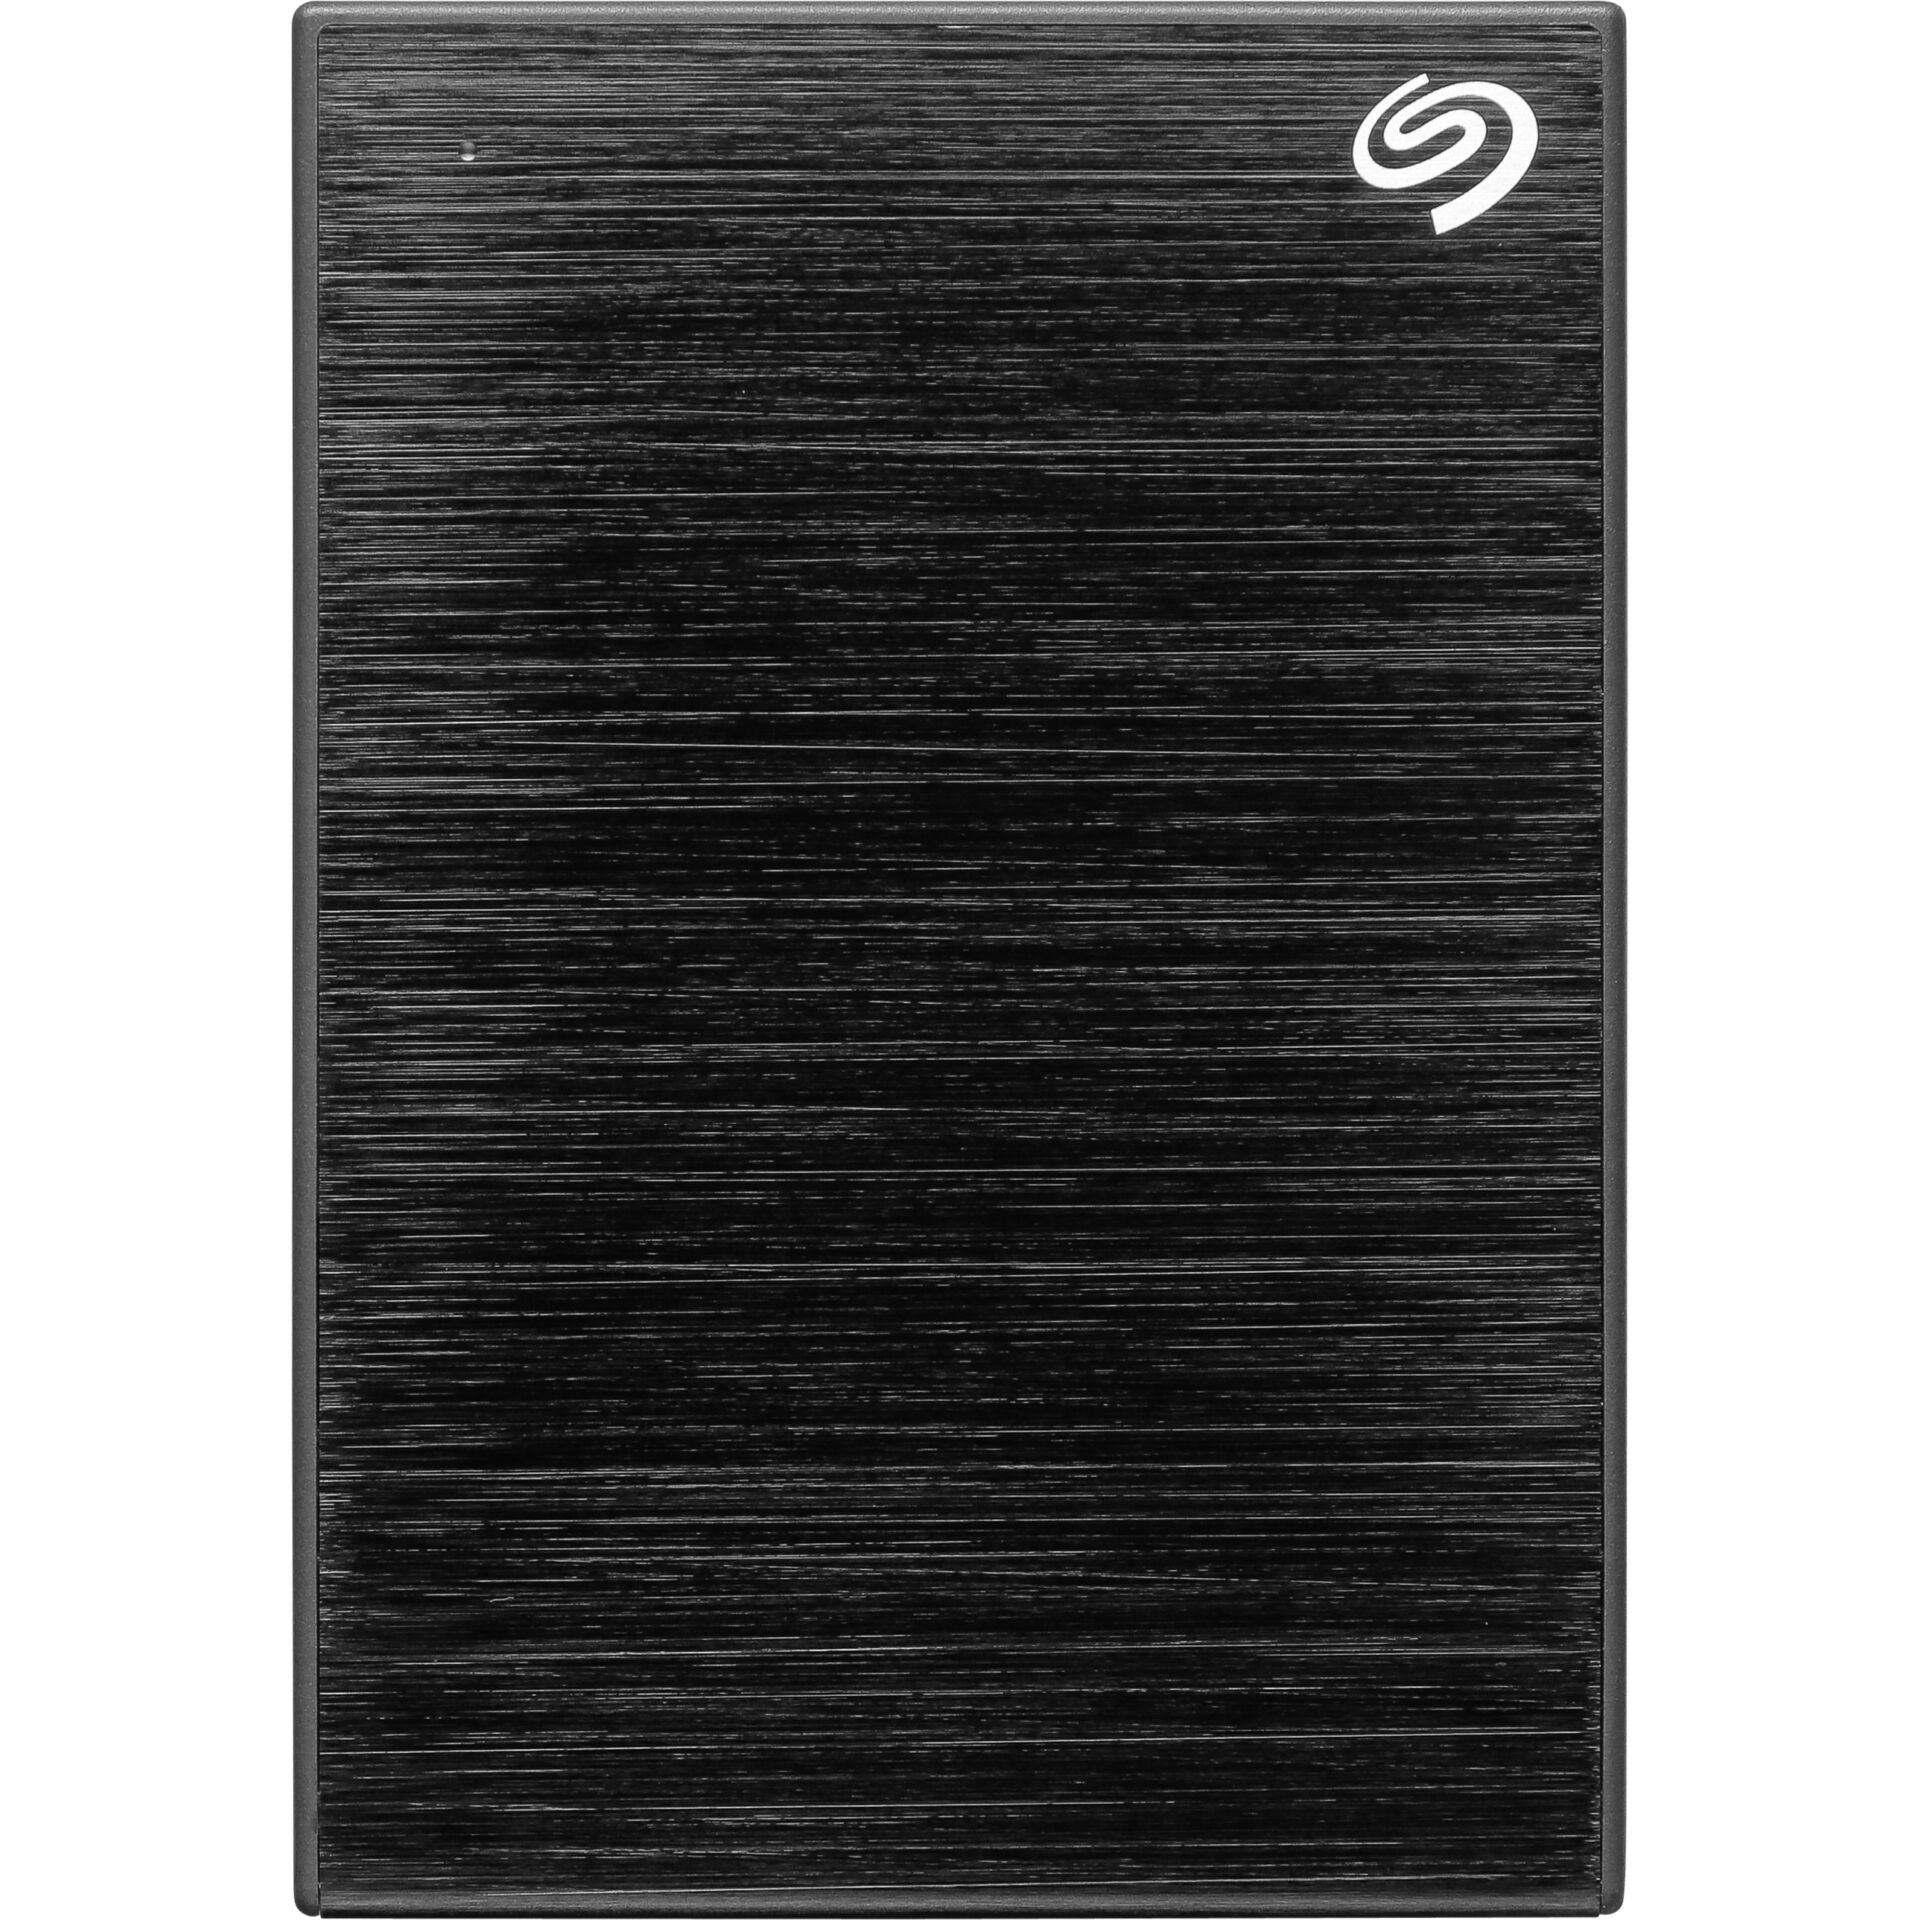 4 OneTouch -Seagate -Externe Hardware/Electronic Seagate Portable Festplatte TB